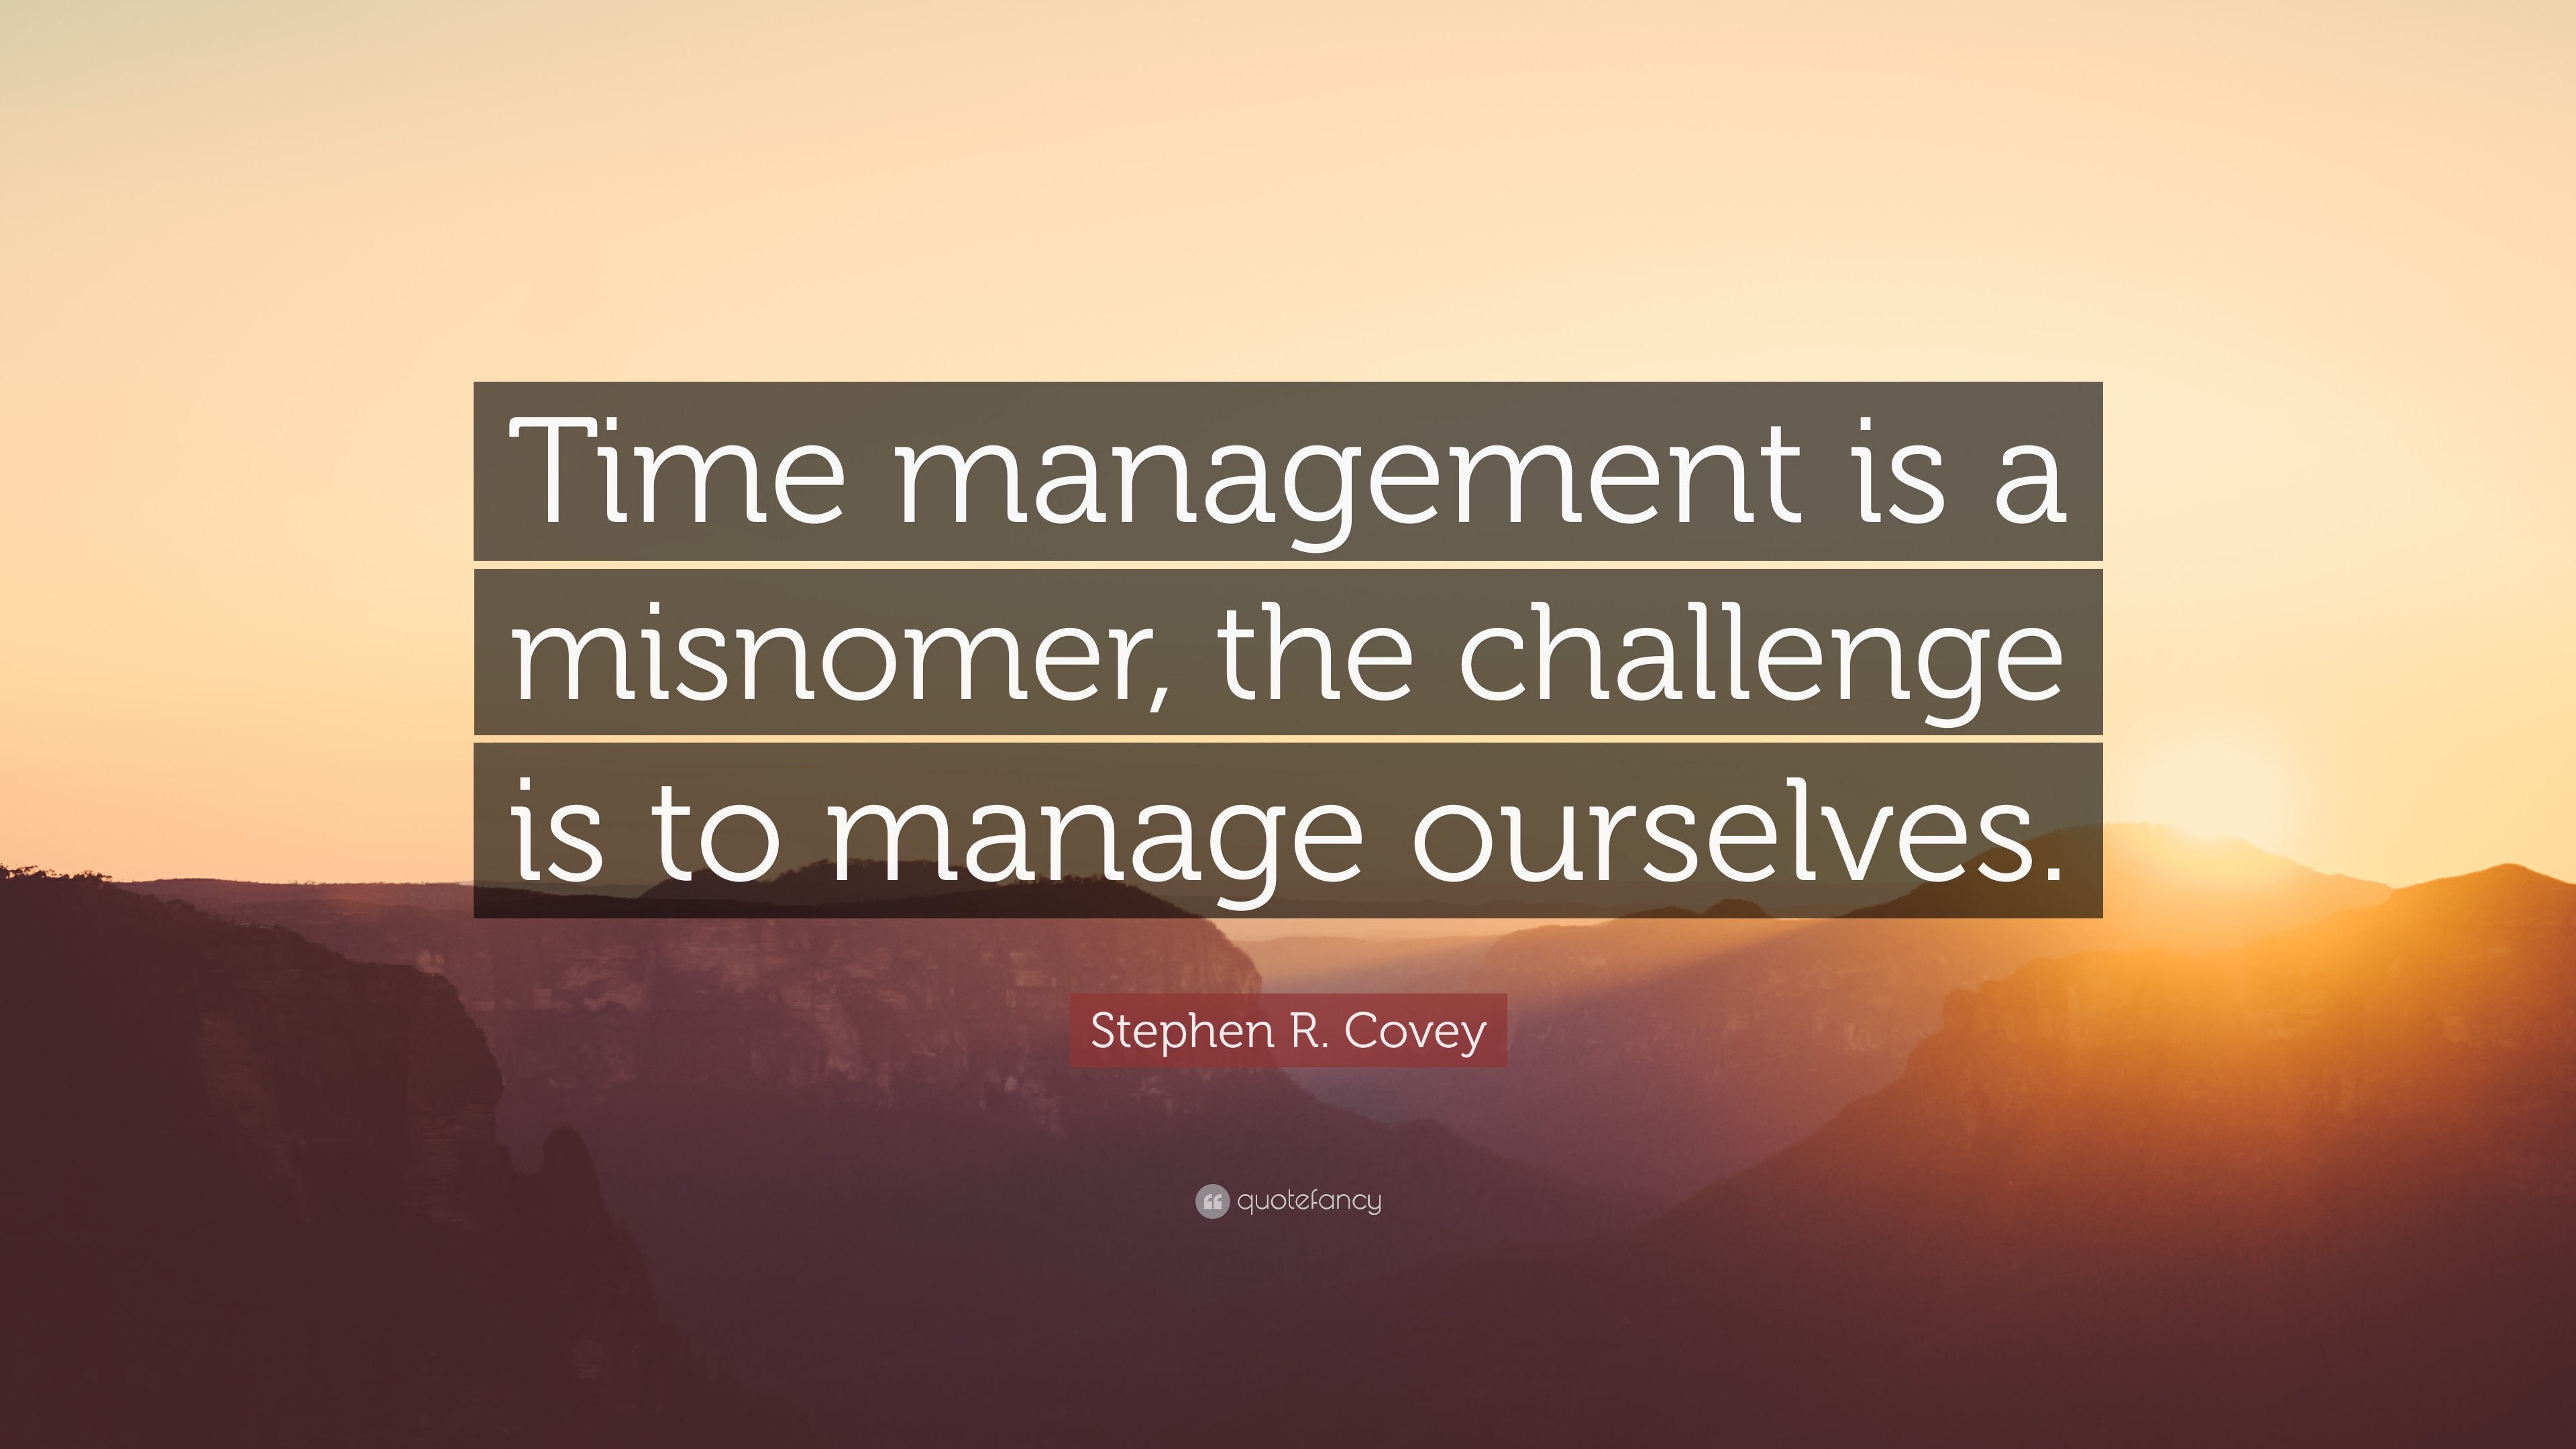 Stephen R. Covey Quote “Time management is a misnomer